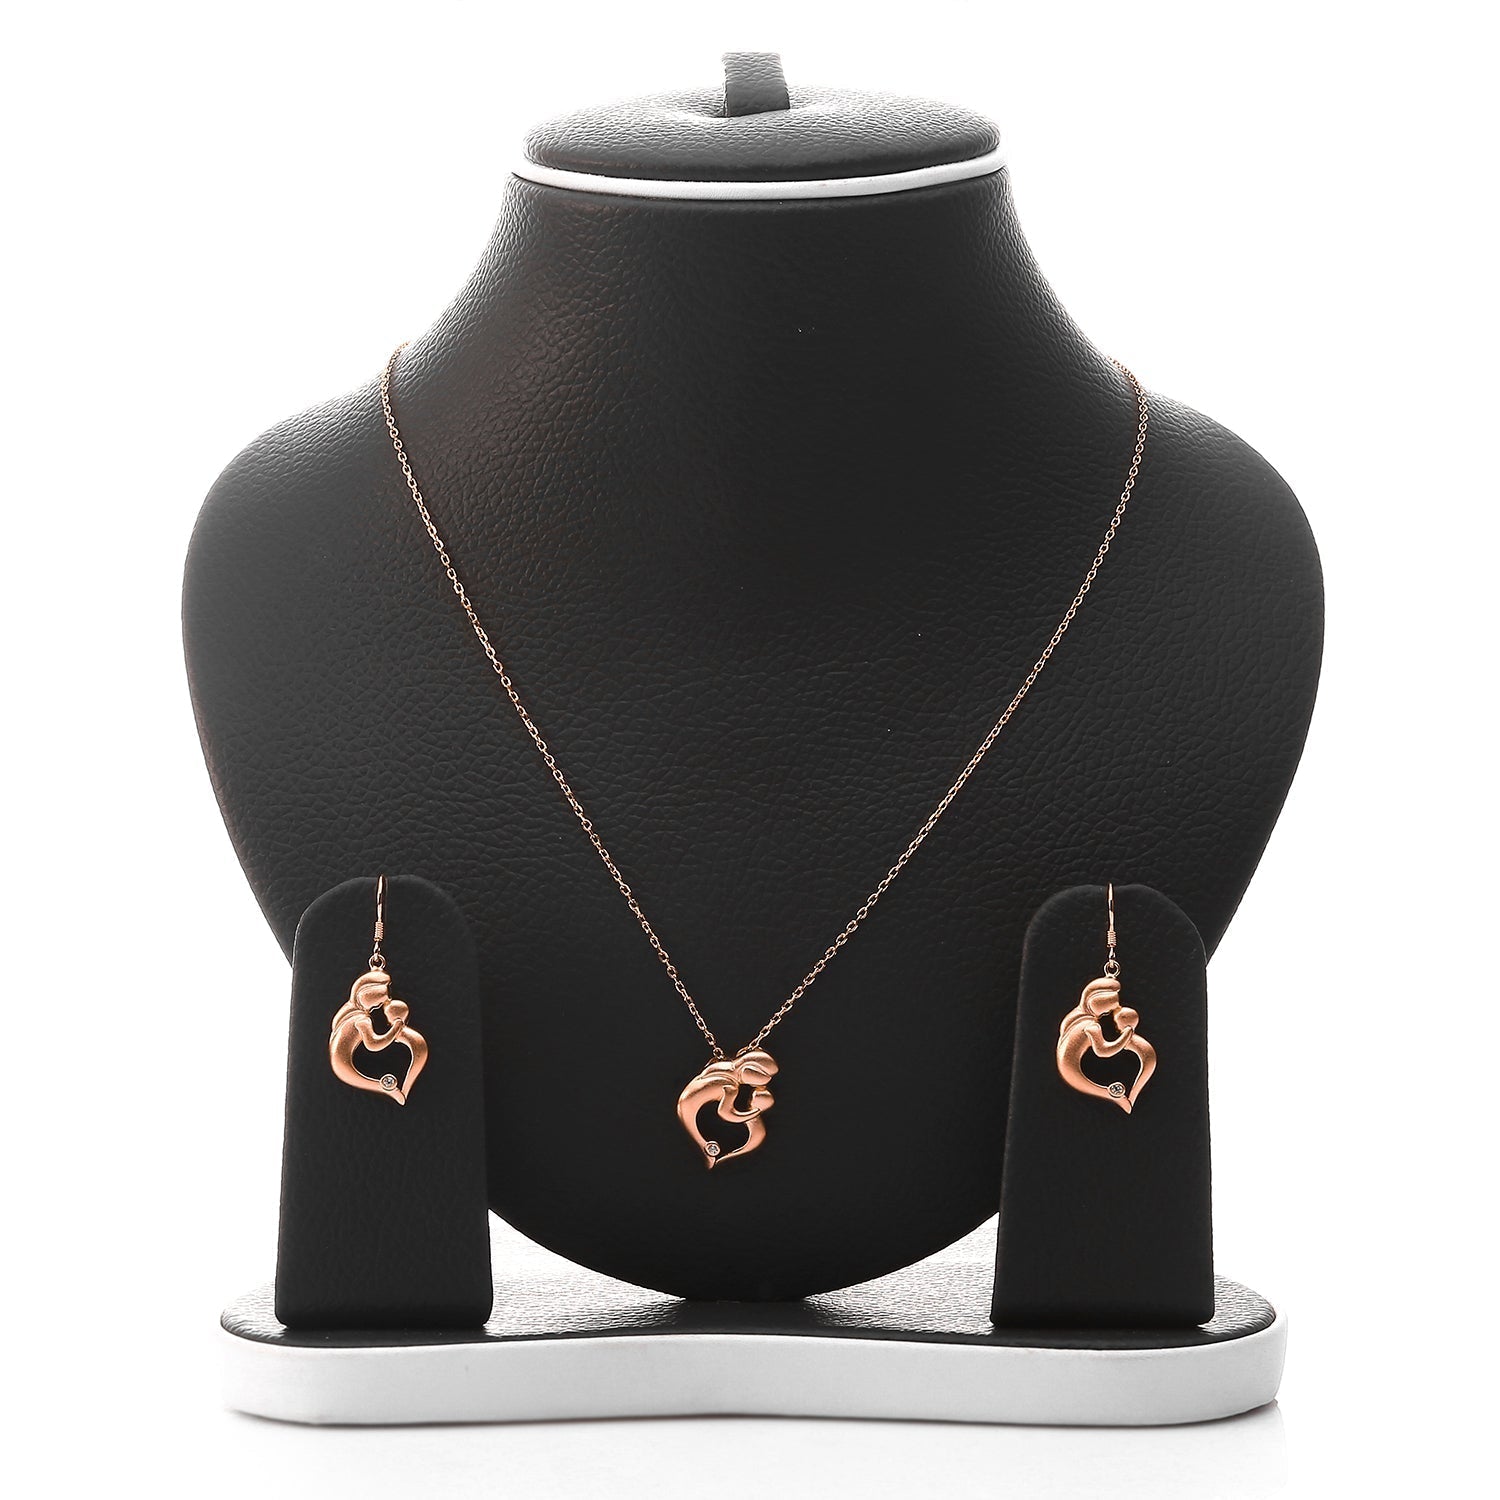 Endless Mother's Love Pendant Necklace and Earrings Set - ARJW1024RG ARCADIO